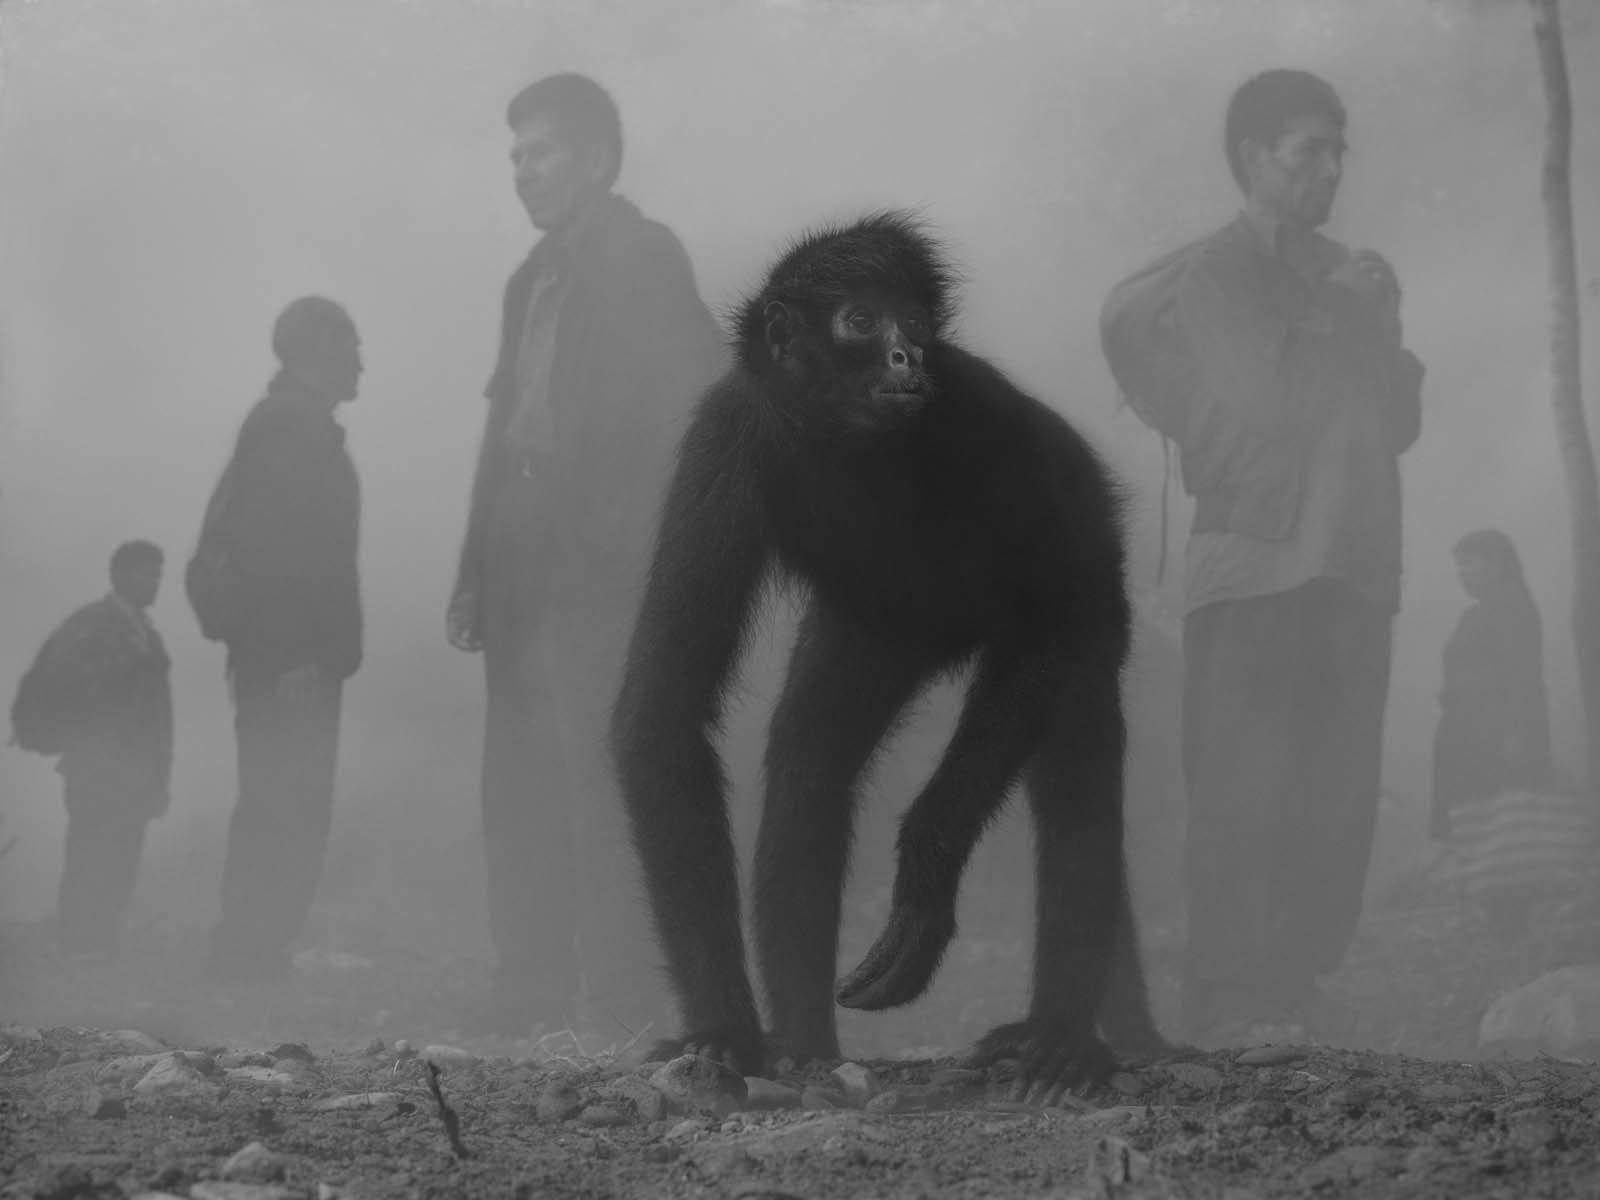 Nick Brandt, Tricia and People in Fog Bolivia, 2022